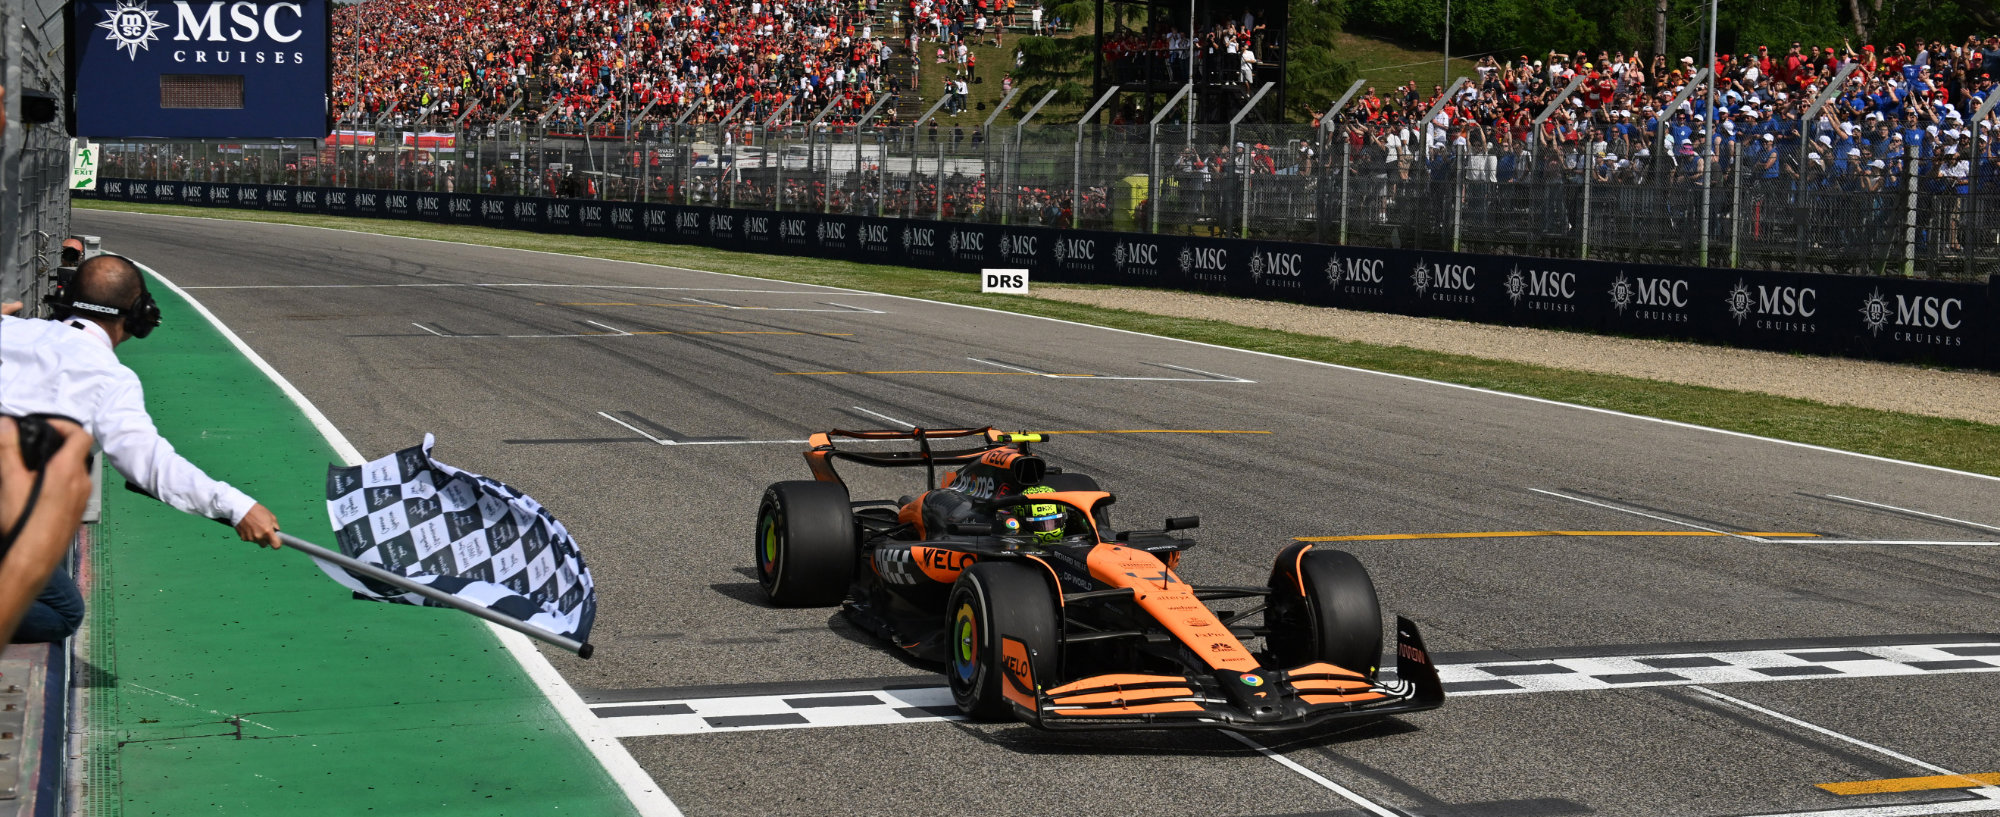 Lando Norris's McLaren Number 4 crossing the line at Imola, the chequered flag waving in the foreground. 